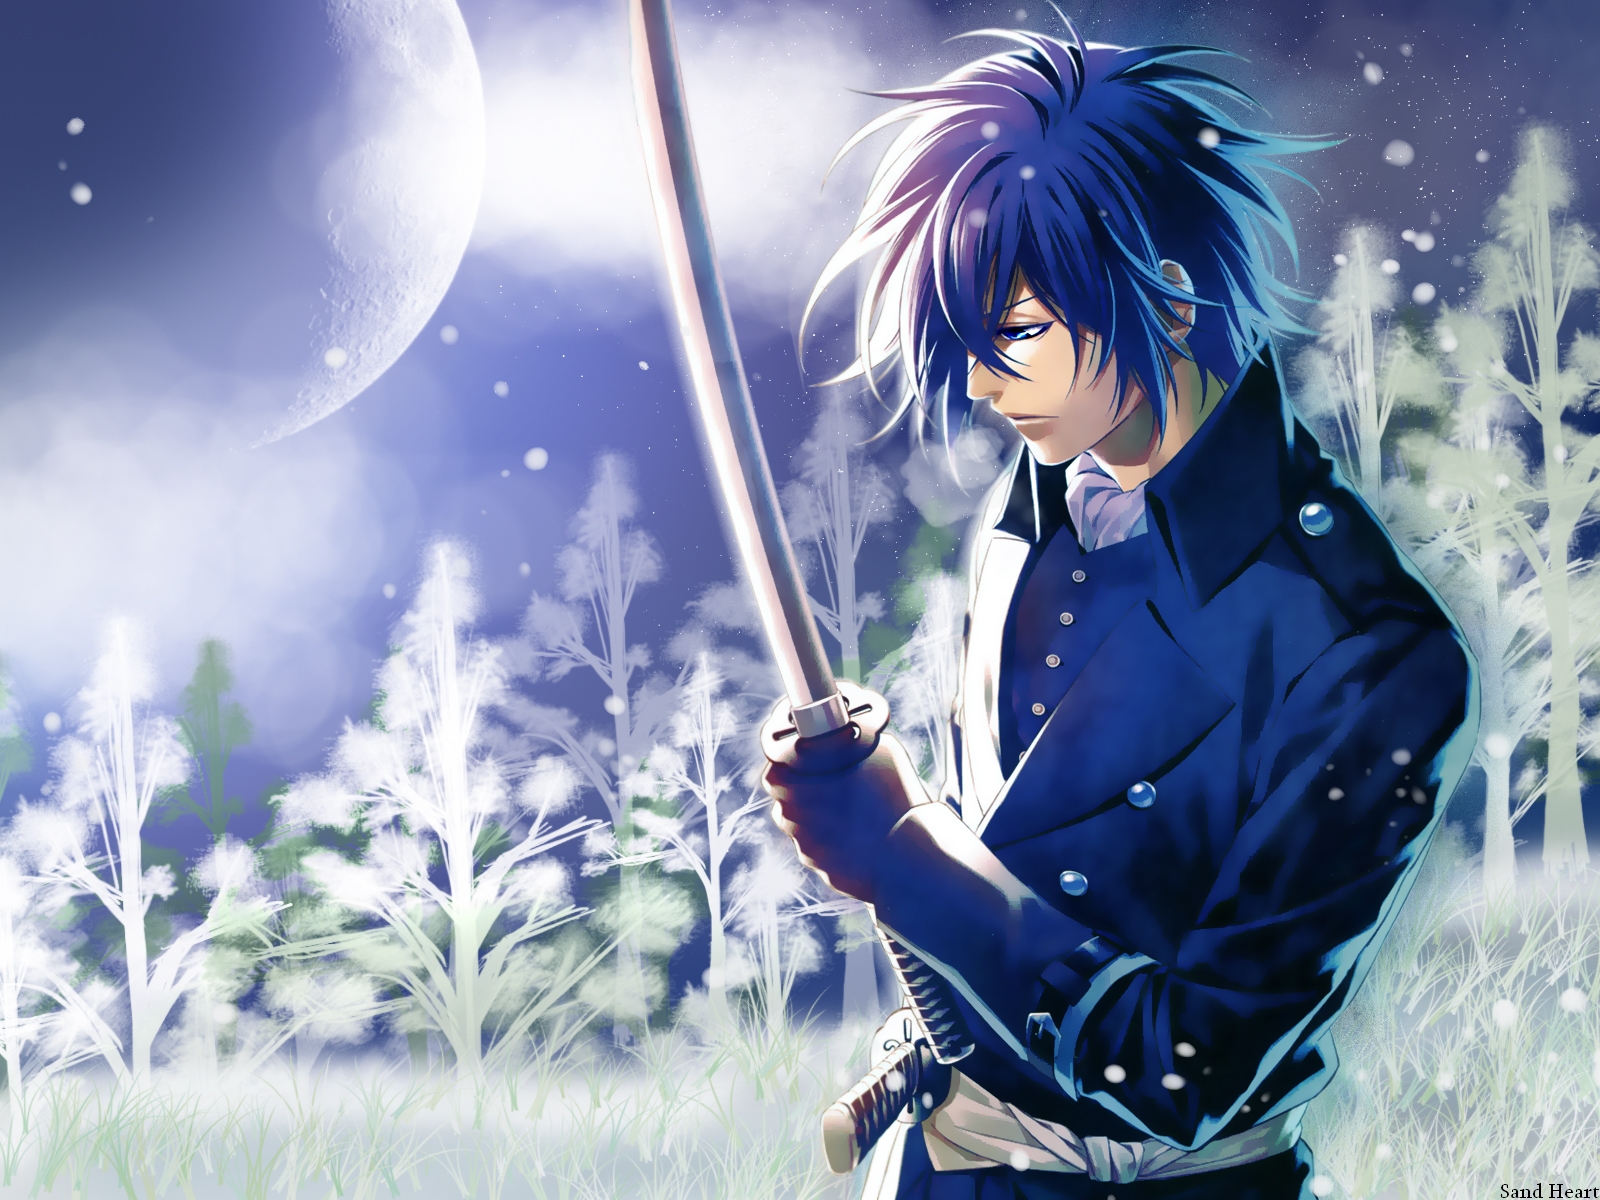 Sword Anime Guy With Blue Hair 1600x1200 Wallpaper